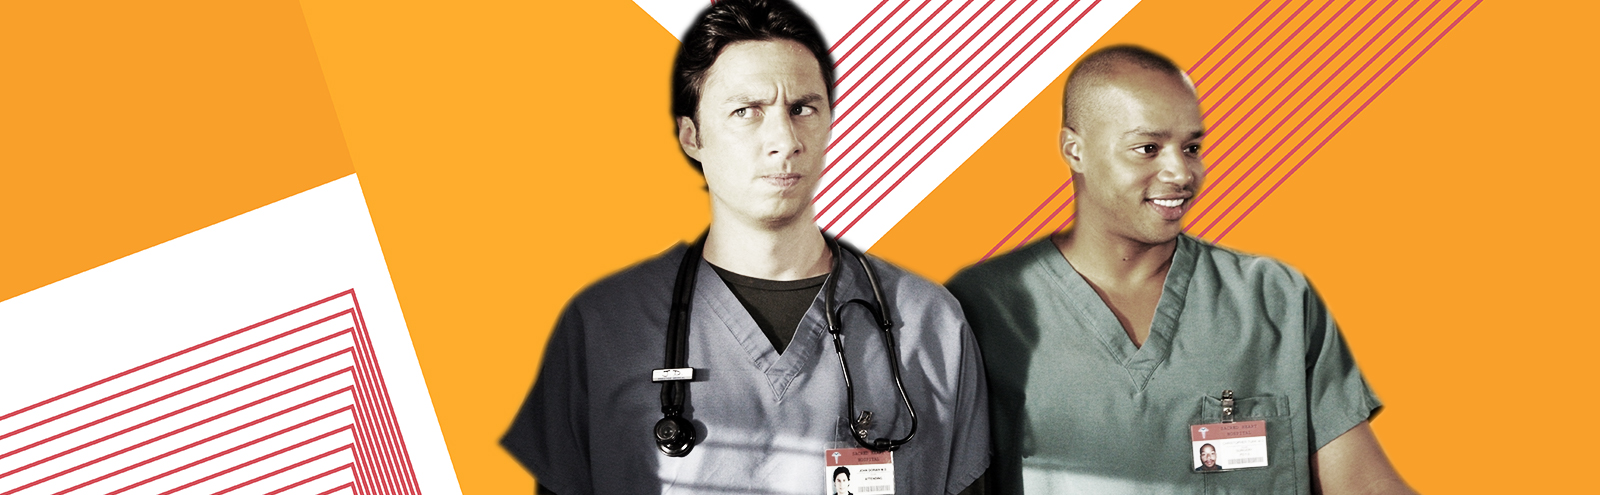 Scrubs' creator says a movie with the original cast could happen